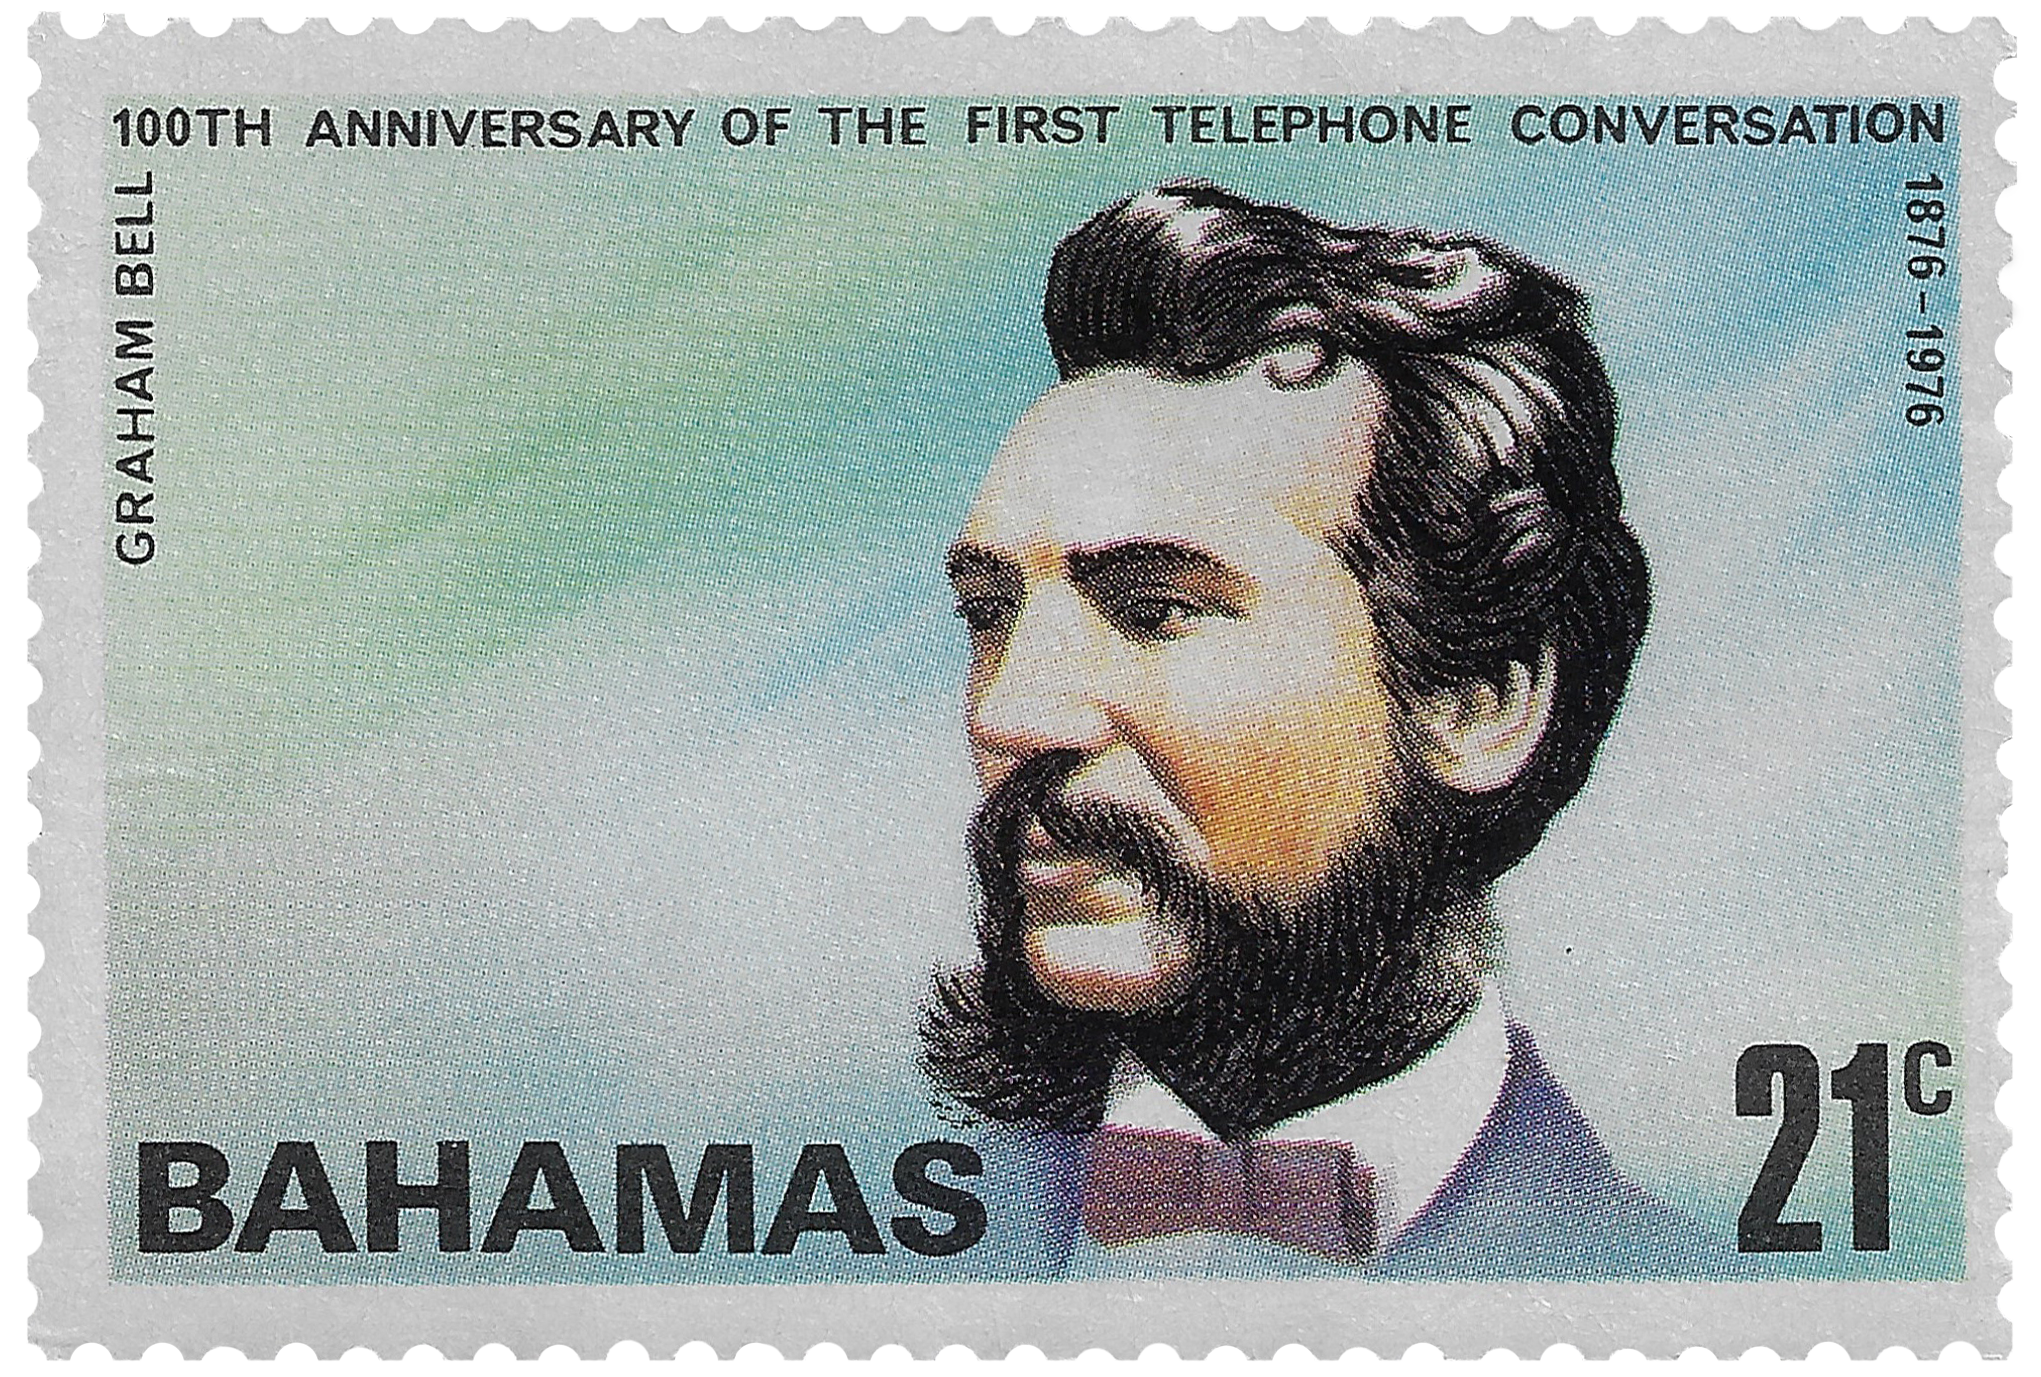 21c 1976, 100th Anniversary of the First Telephone Conversation, Graham Bell, 1876-1976